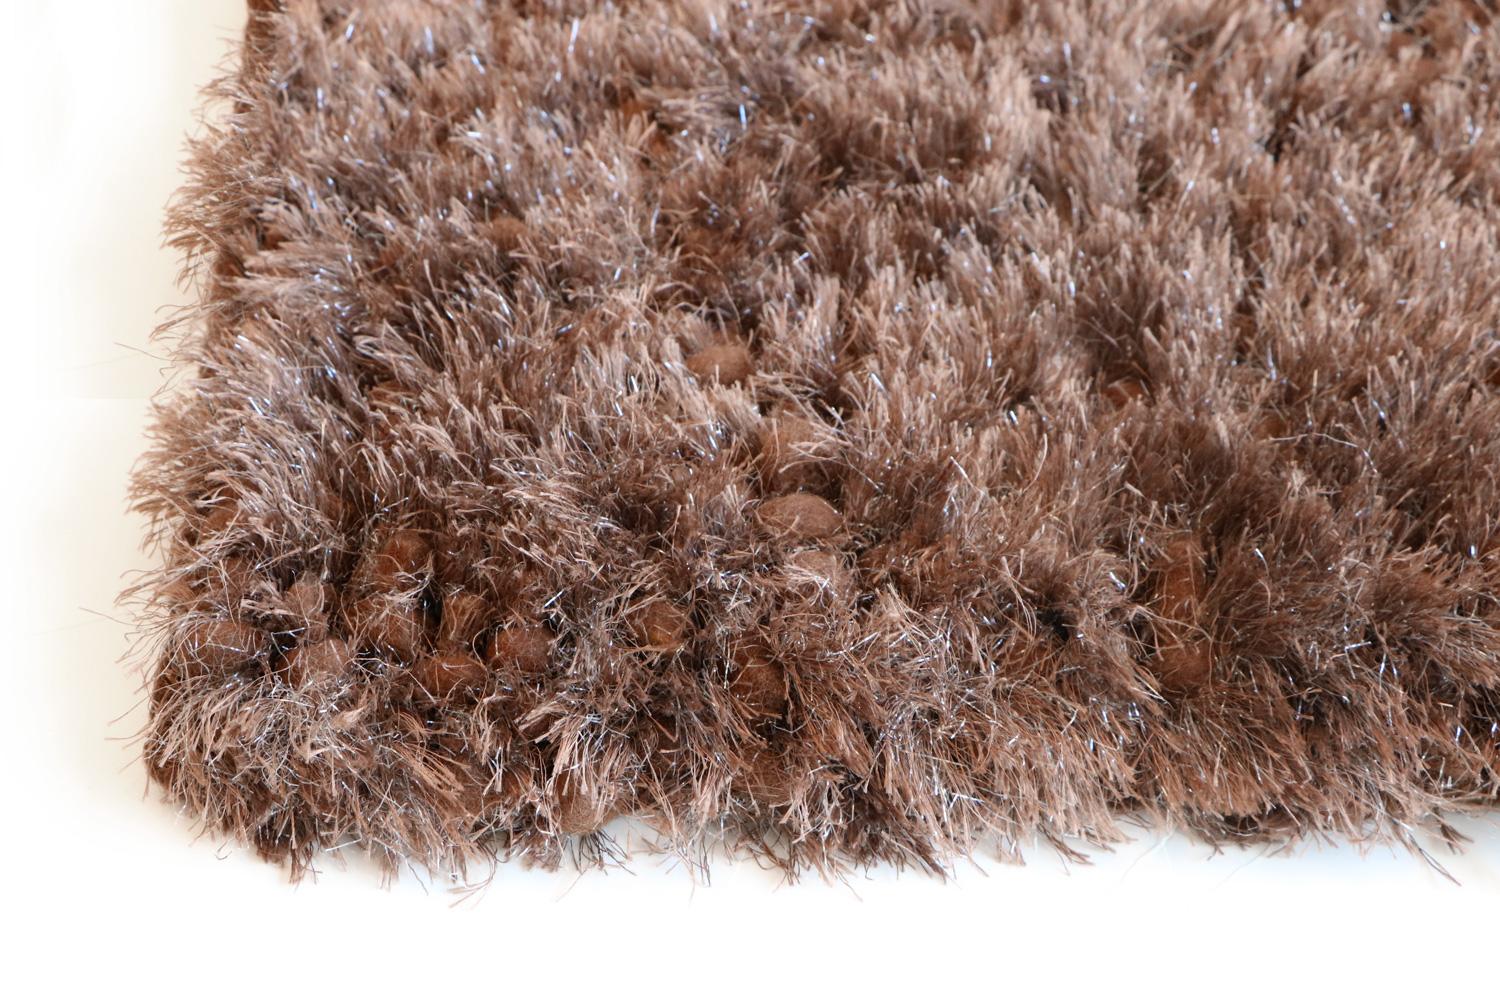 Hand-Woven Nature Inspired Luminous Spring Brown Rug by Deanna Comellini In Stock 170x240cm For Sale